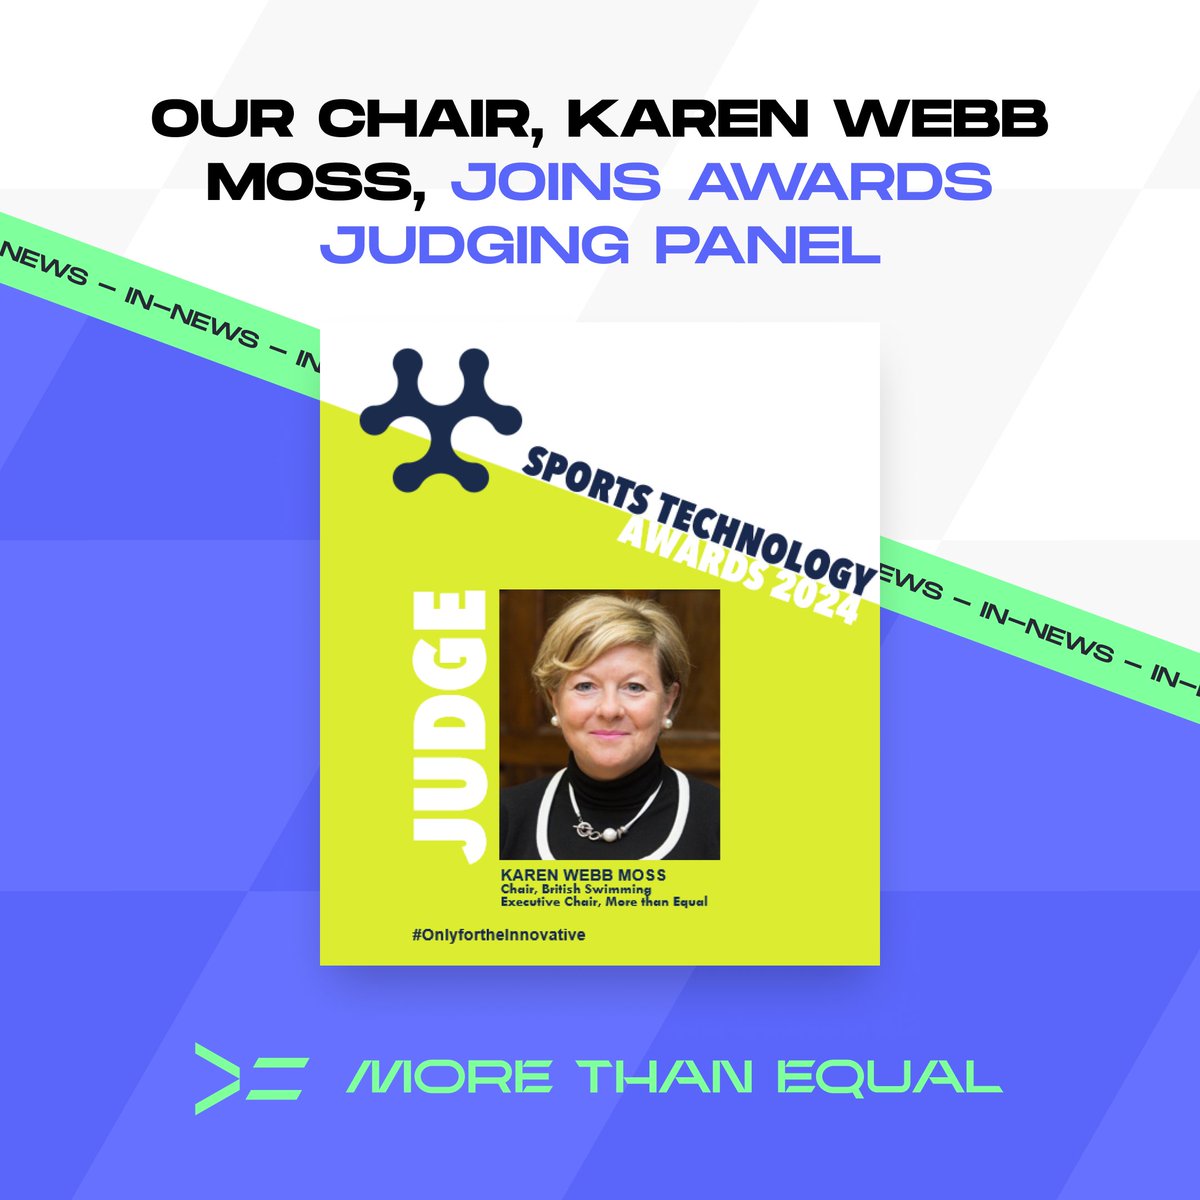 We're excited to announce that our Chair of the Board, Karen Webb Moss, will be serving as a judge for the 2024 Sports Technology Awards.

For more information, follow this link:
sportstechgroup.org/sports-technol…

#STA #OnlyForTheInnovative #MoreThanEqual #sportstechnology #sports